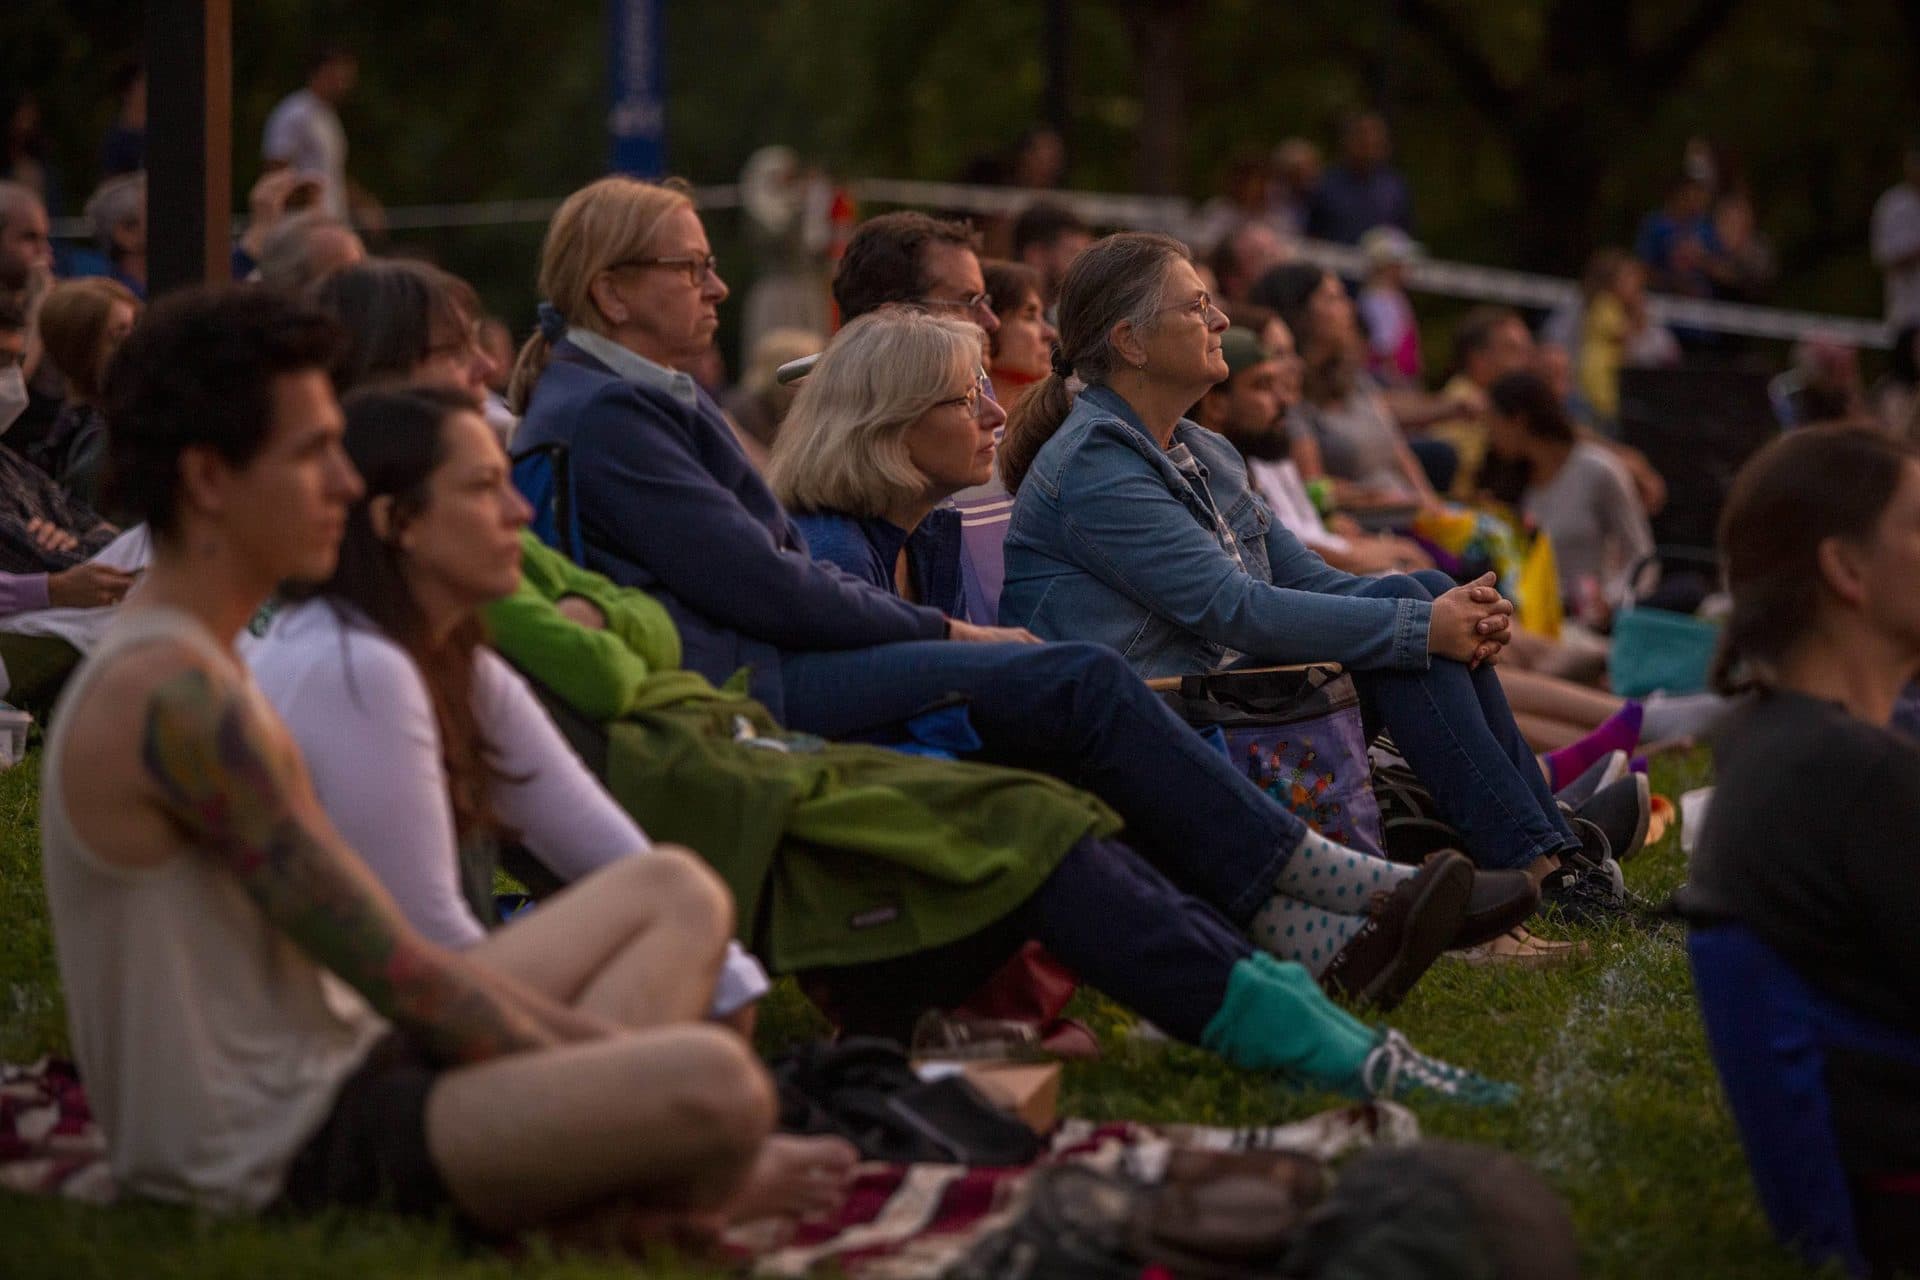 As darkness falls, the audience watches &quot;The Tempest&quot; on Boston Common. (Robin Lubbock/WBUR)